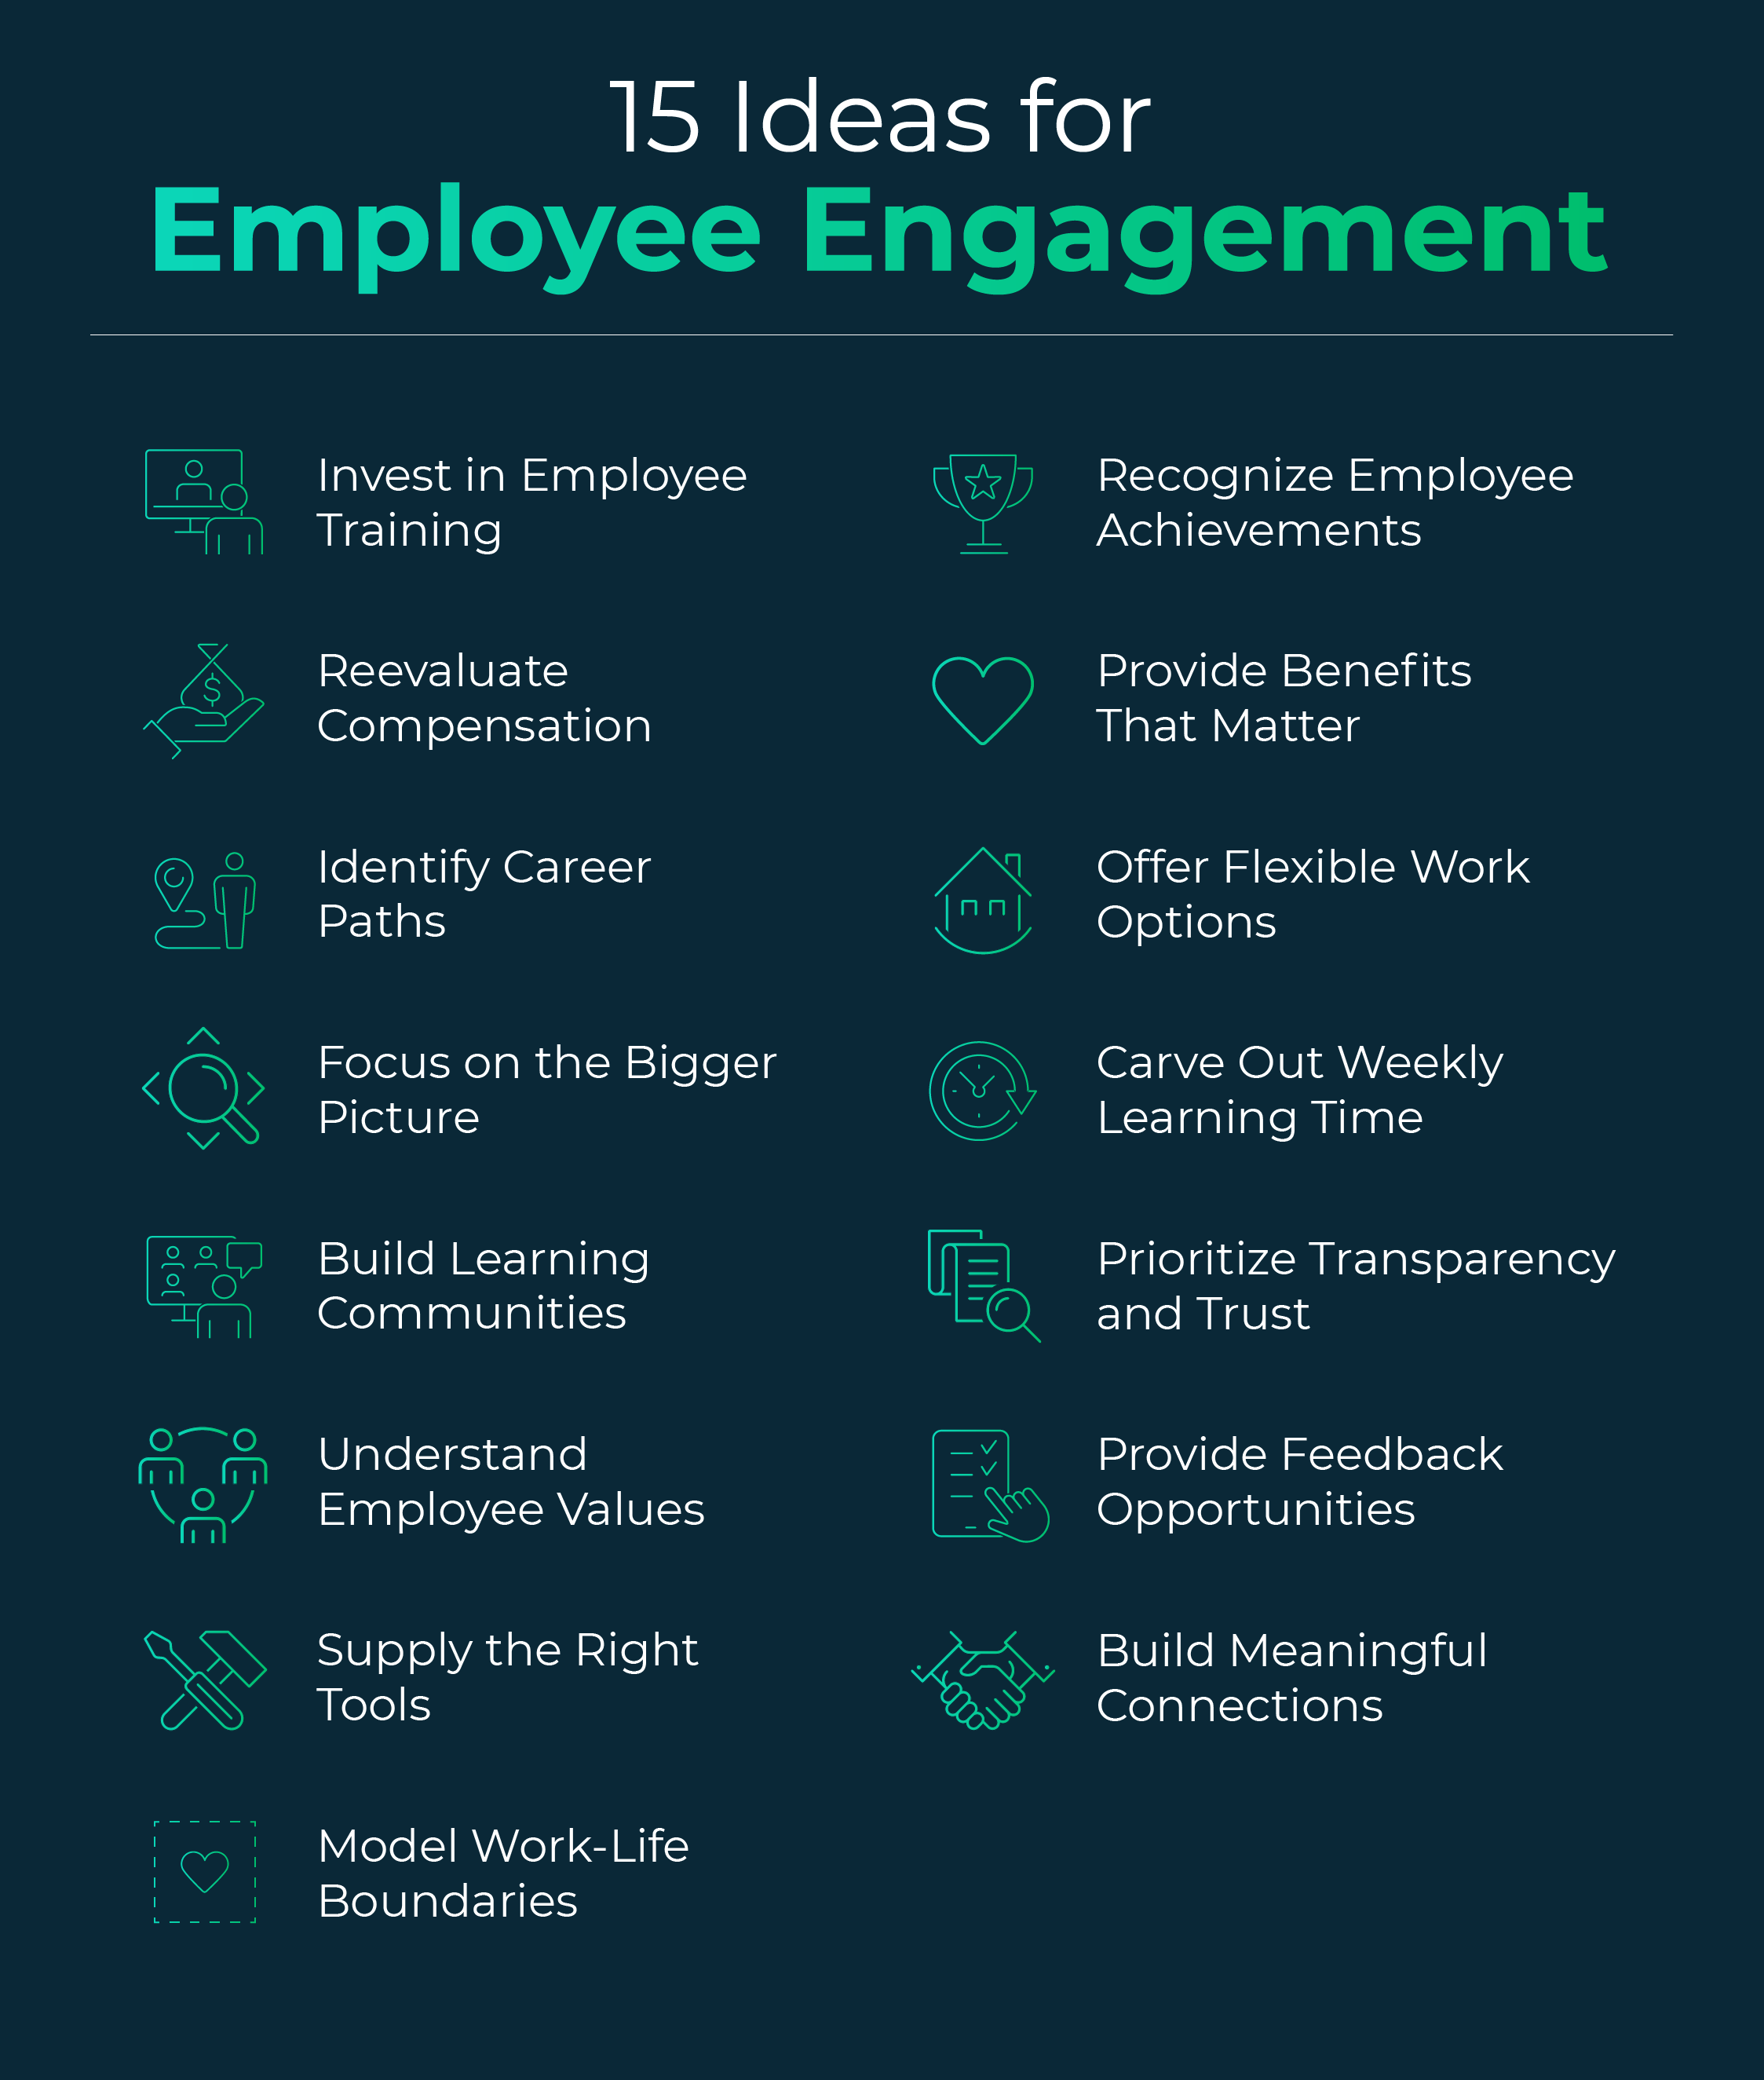 Graphic revealing a list of 15 employee engagement ideas and strategies